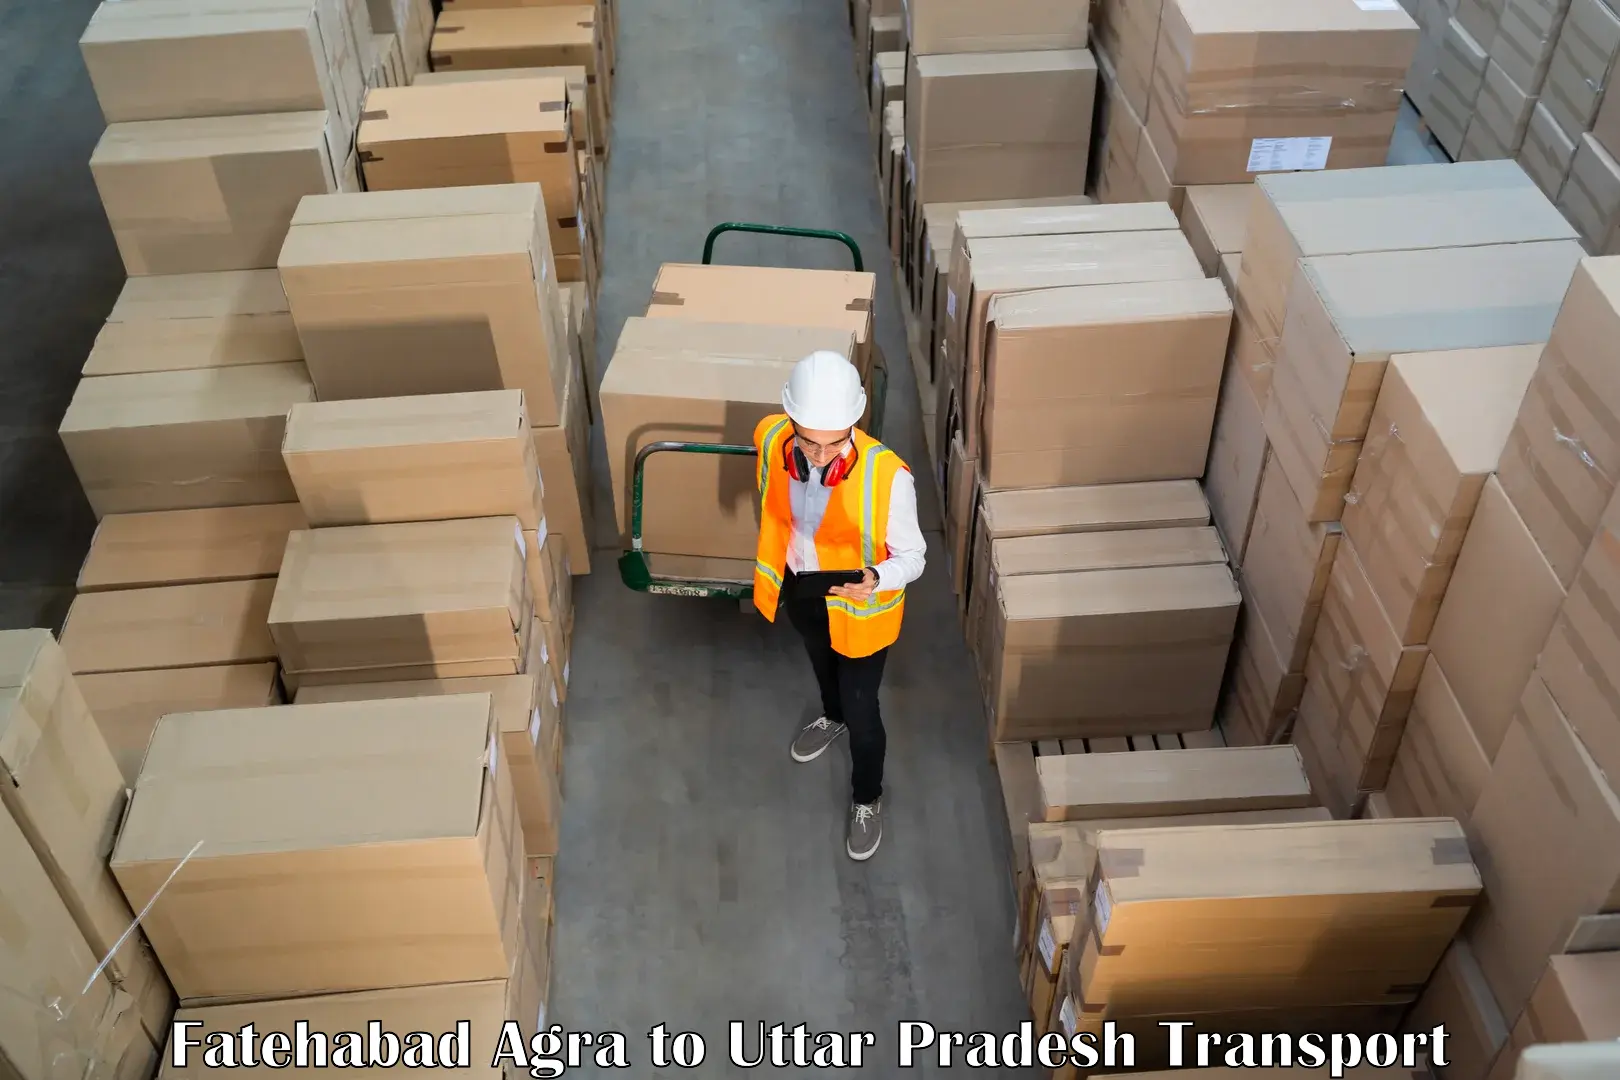 Two wheeler parcel service in Fatehabad Agra to Itava